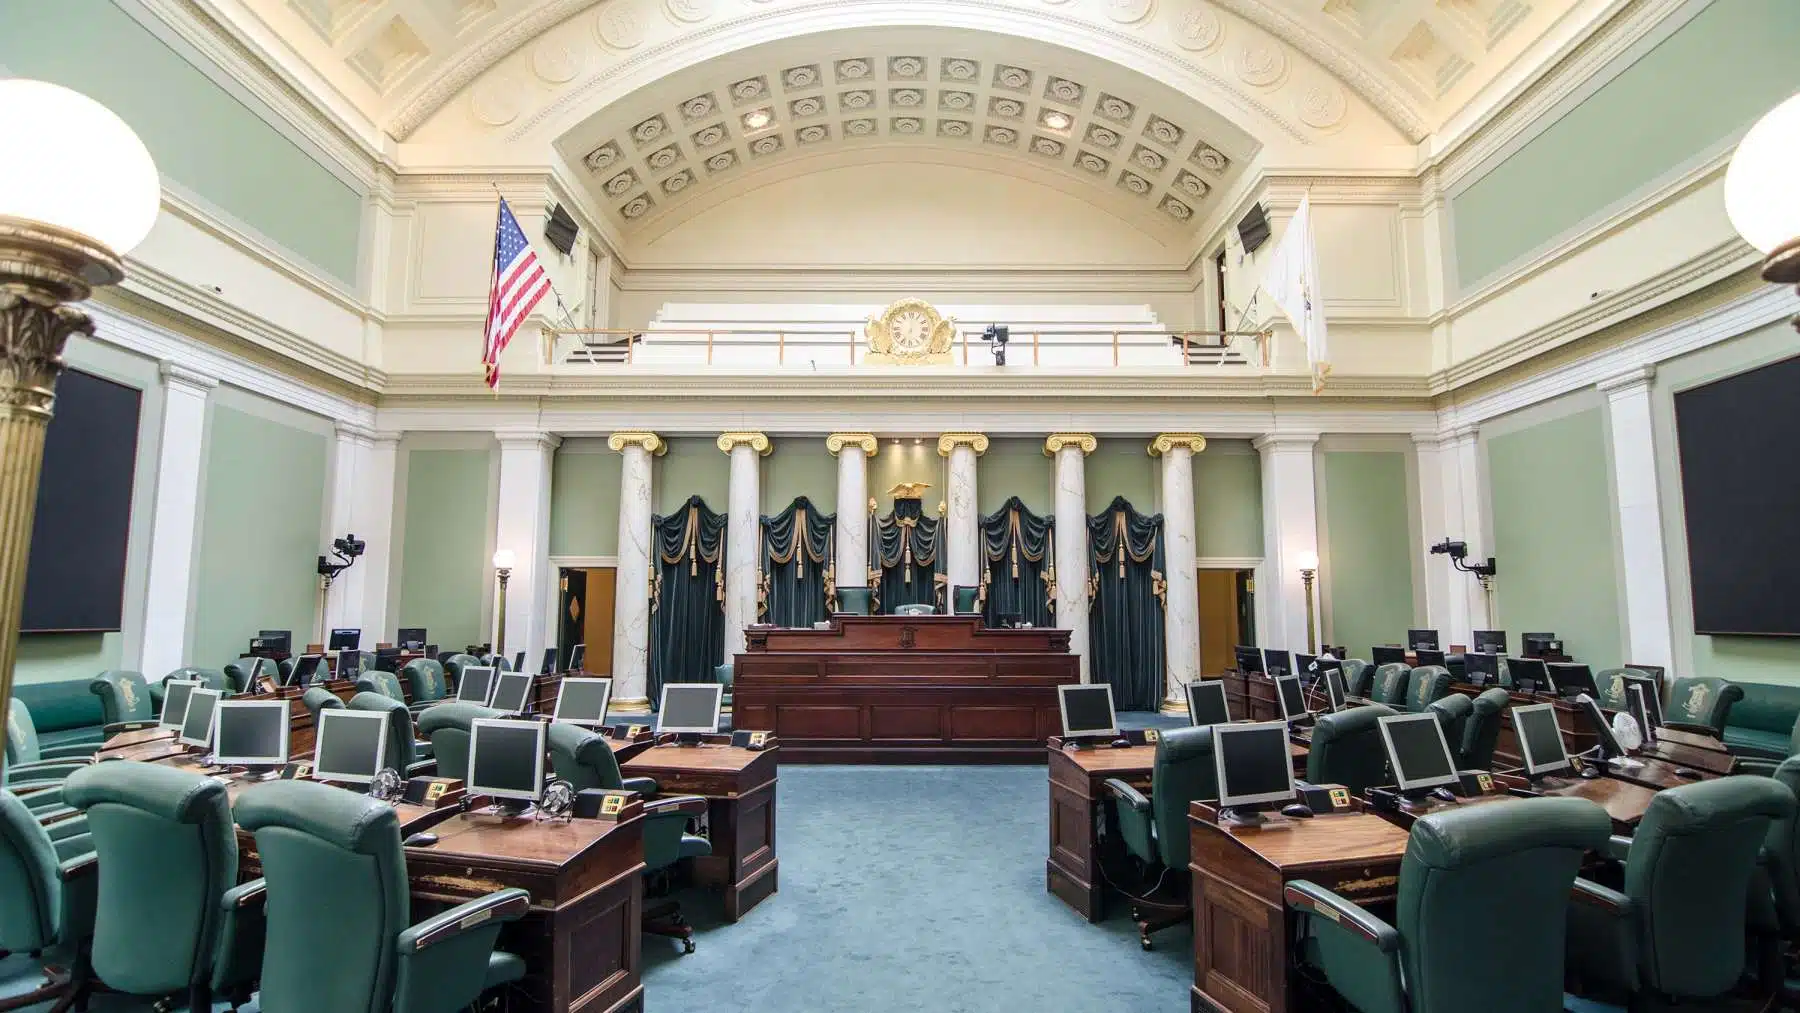 Rhode Island News: Money and movements shaping an election to the Rhode Island Senate